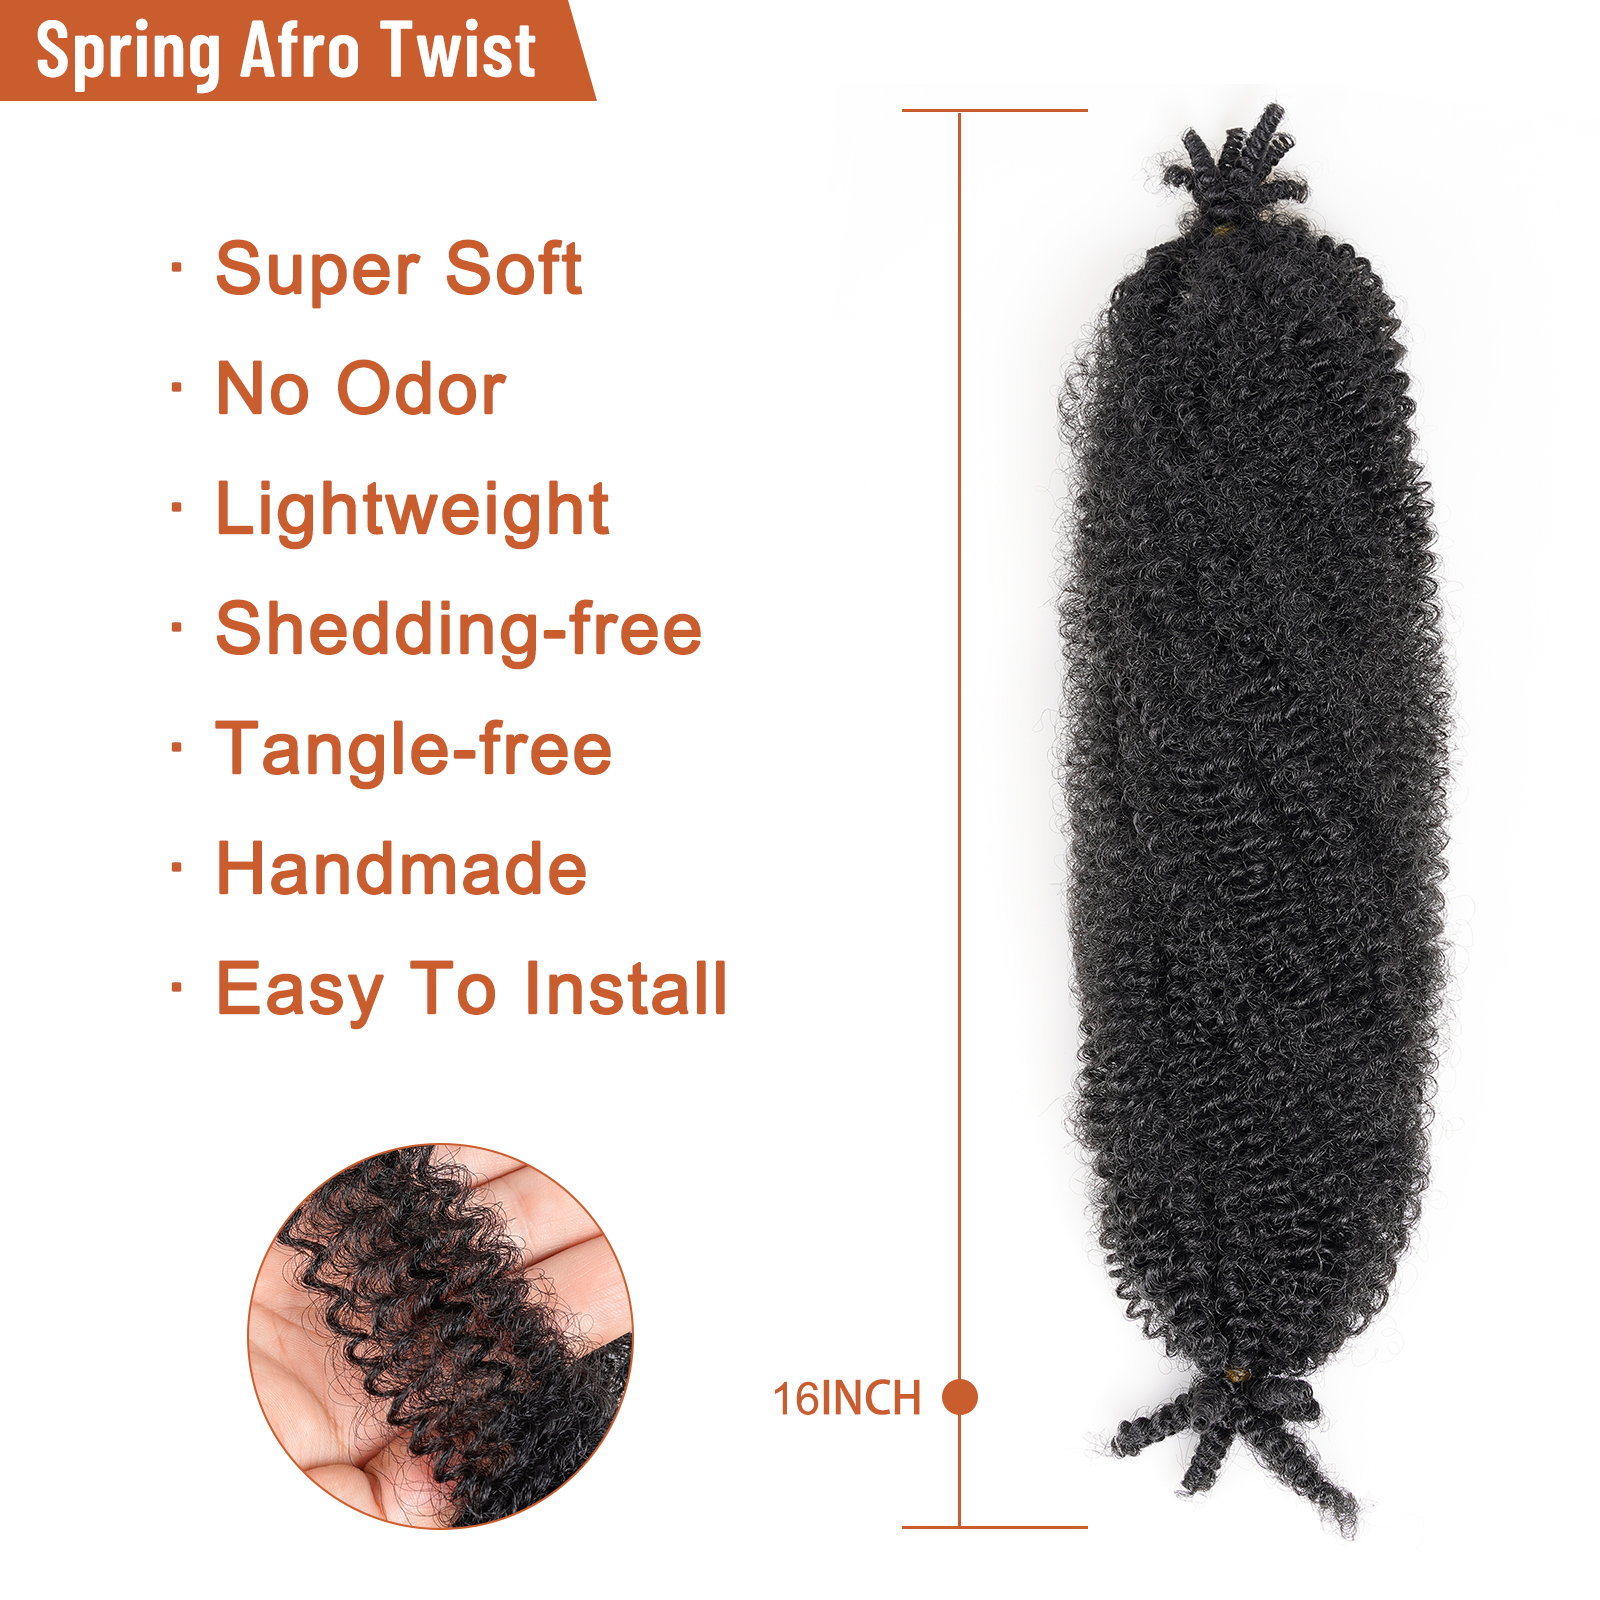 Springy Afro Twist Hair 16